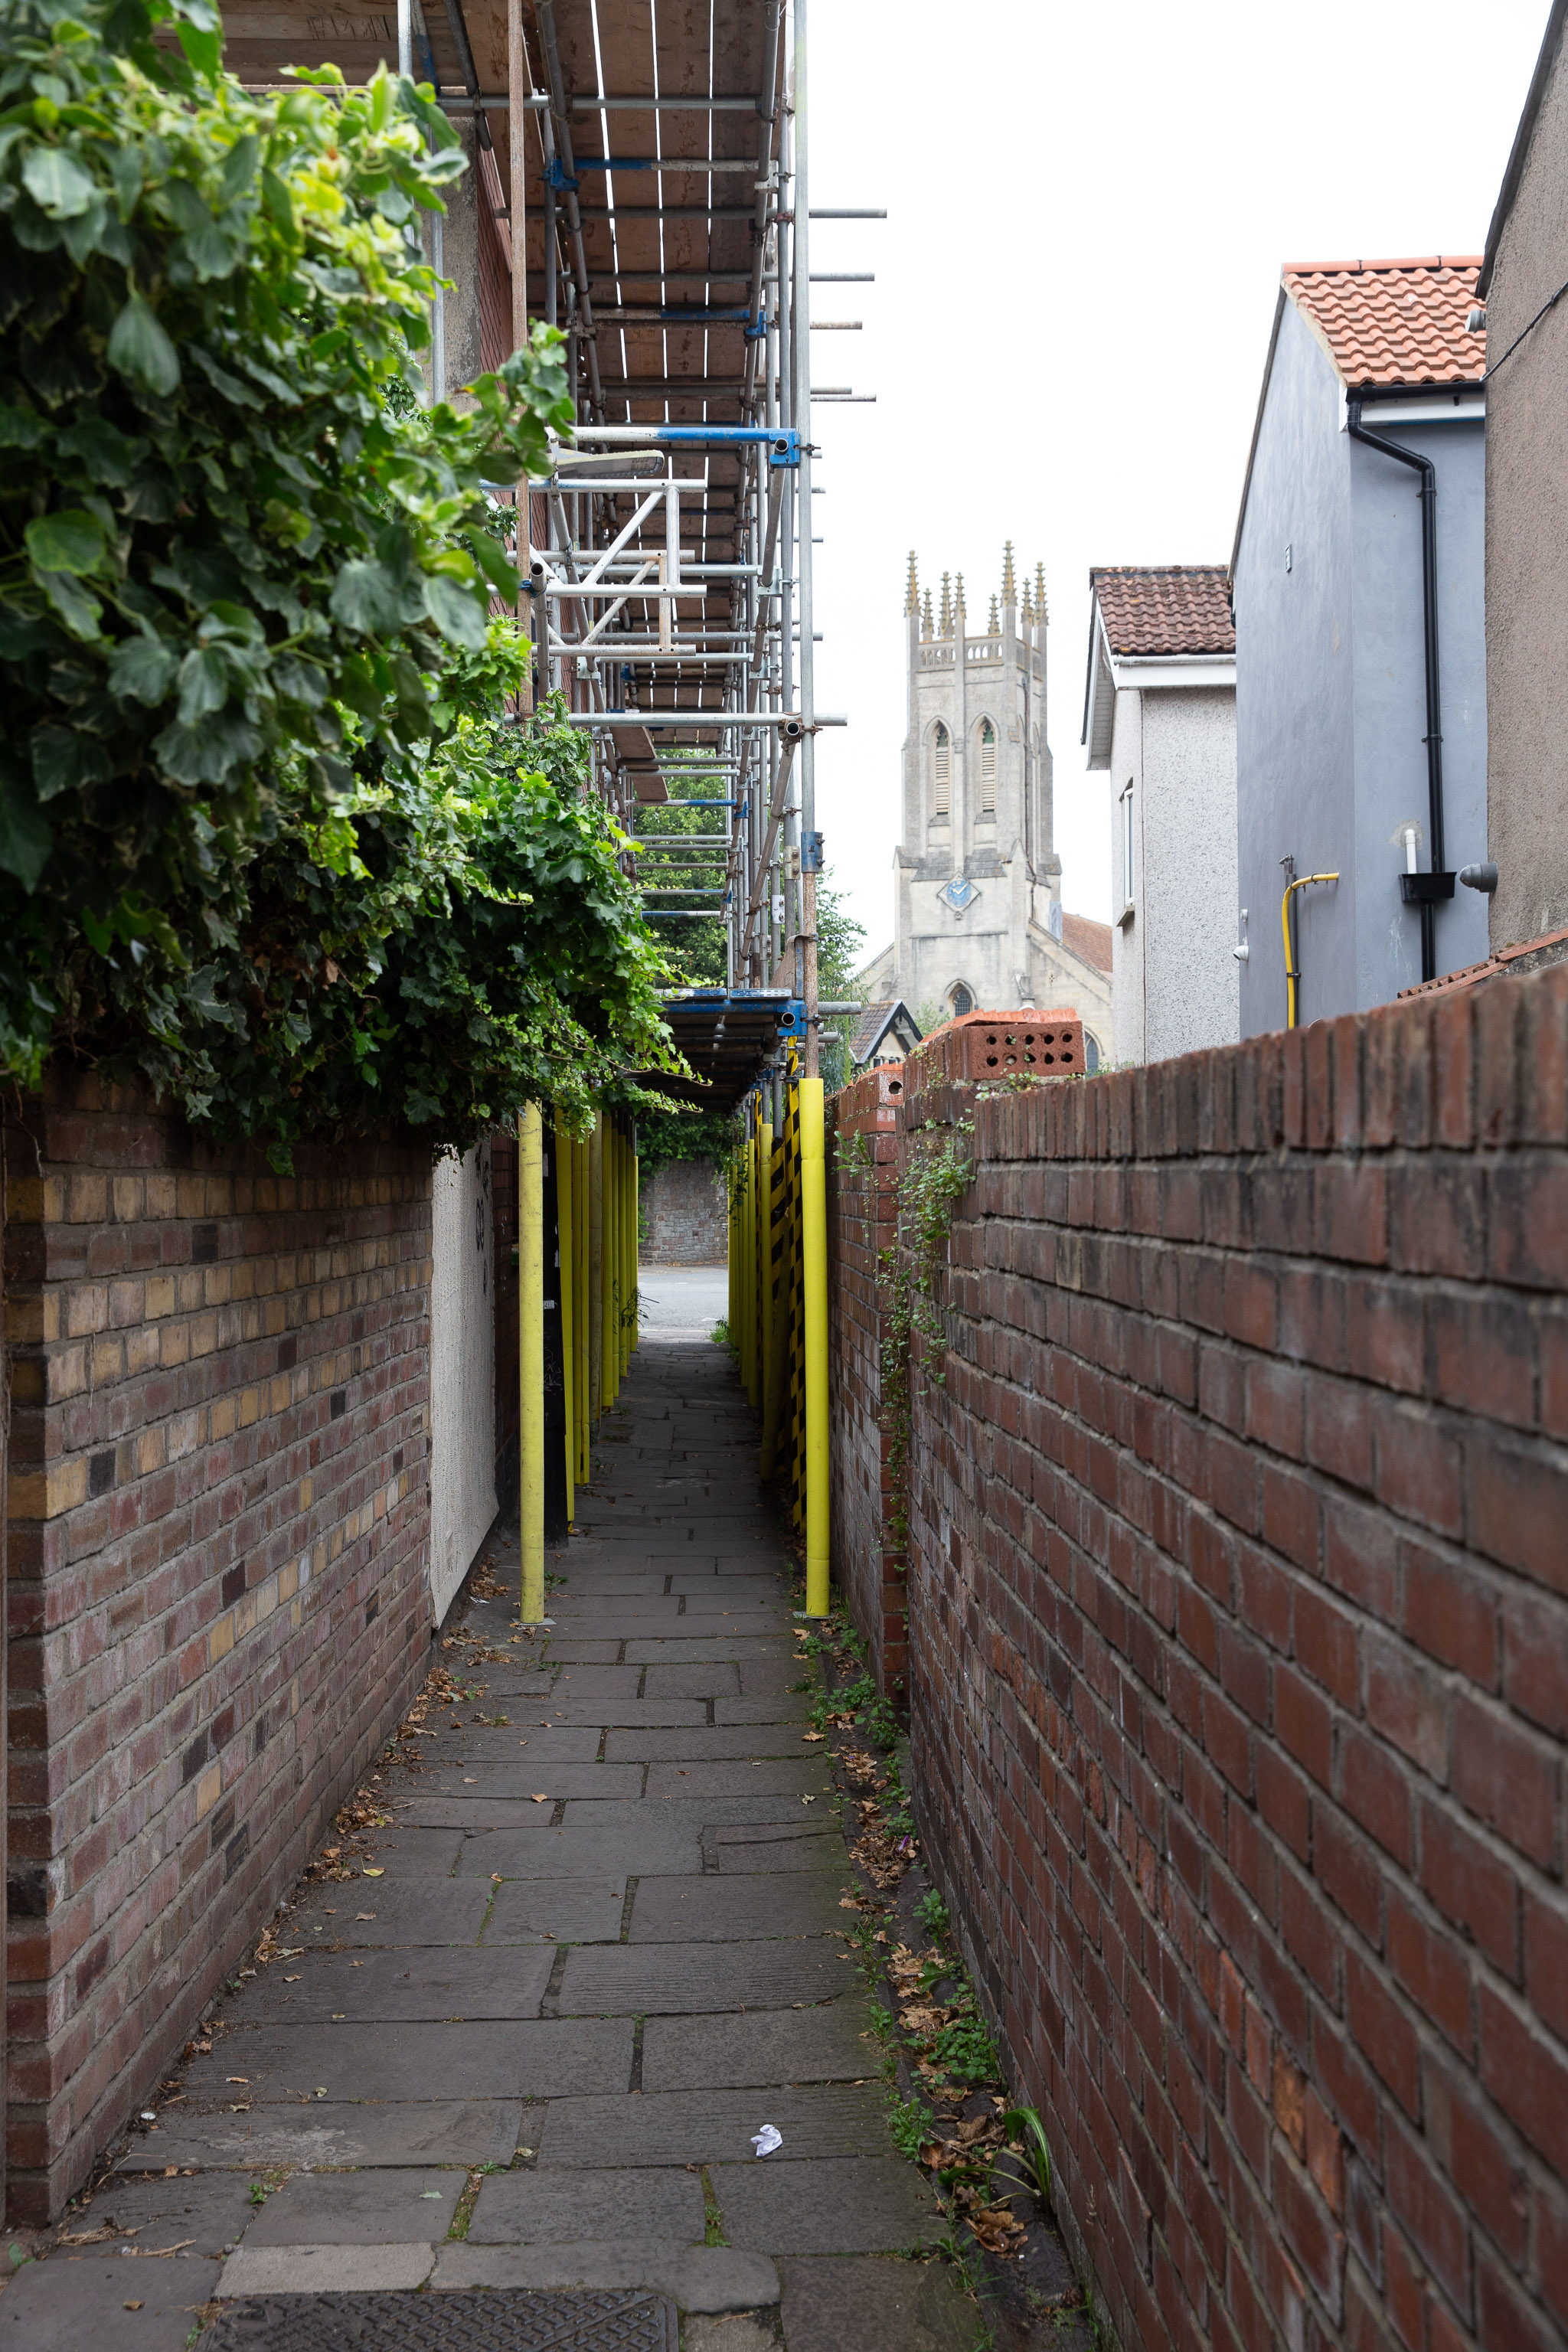 Spire
For an alleyway, Perry Walk has quite a nice view. That's the tower of St Paul's Southville.
